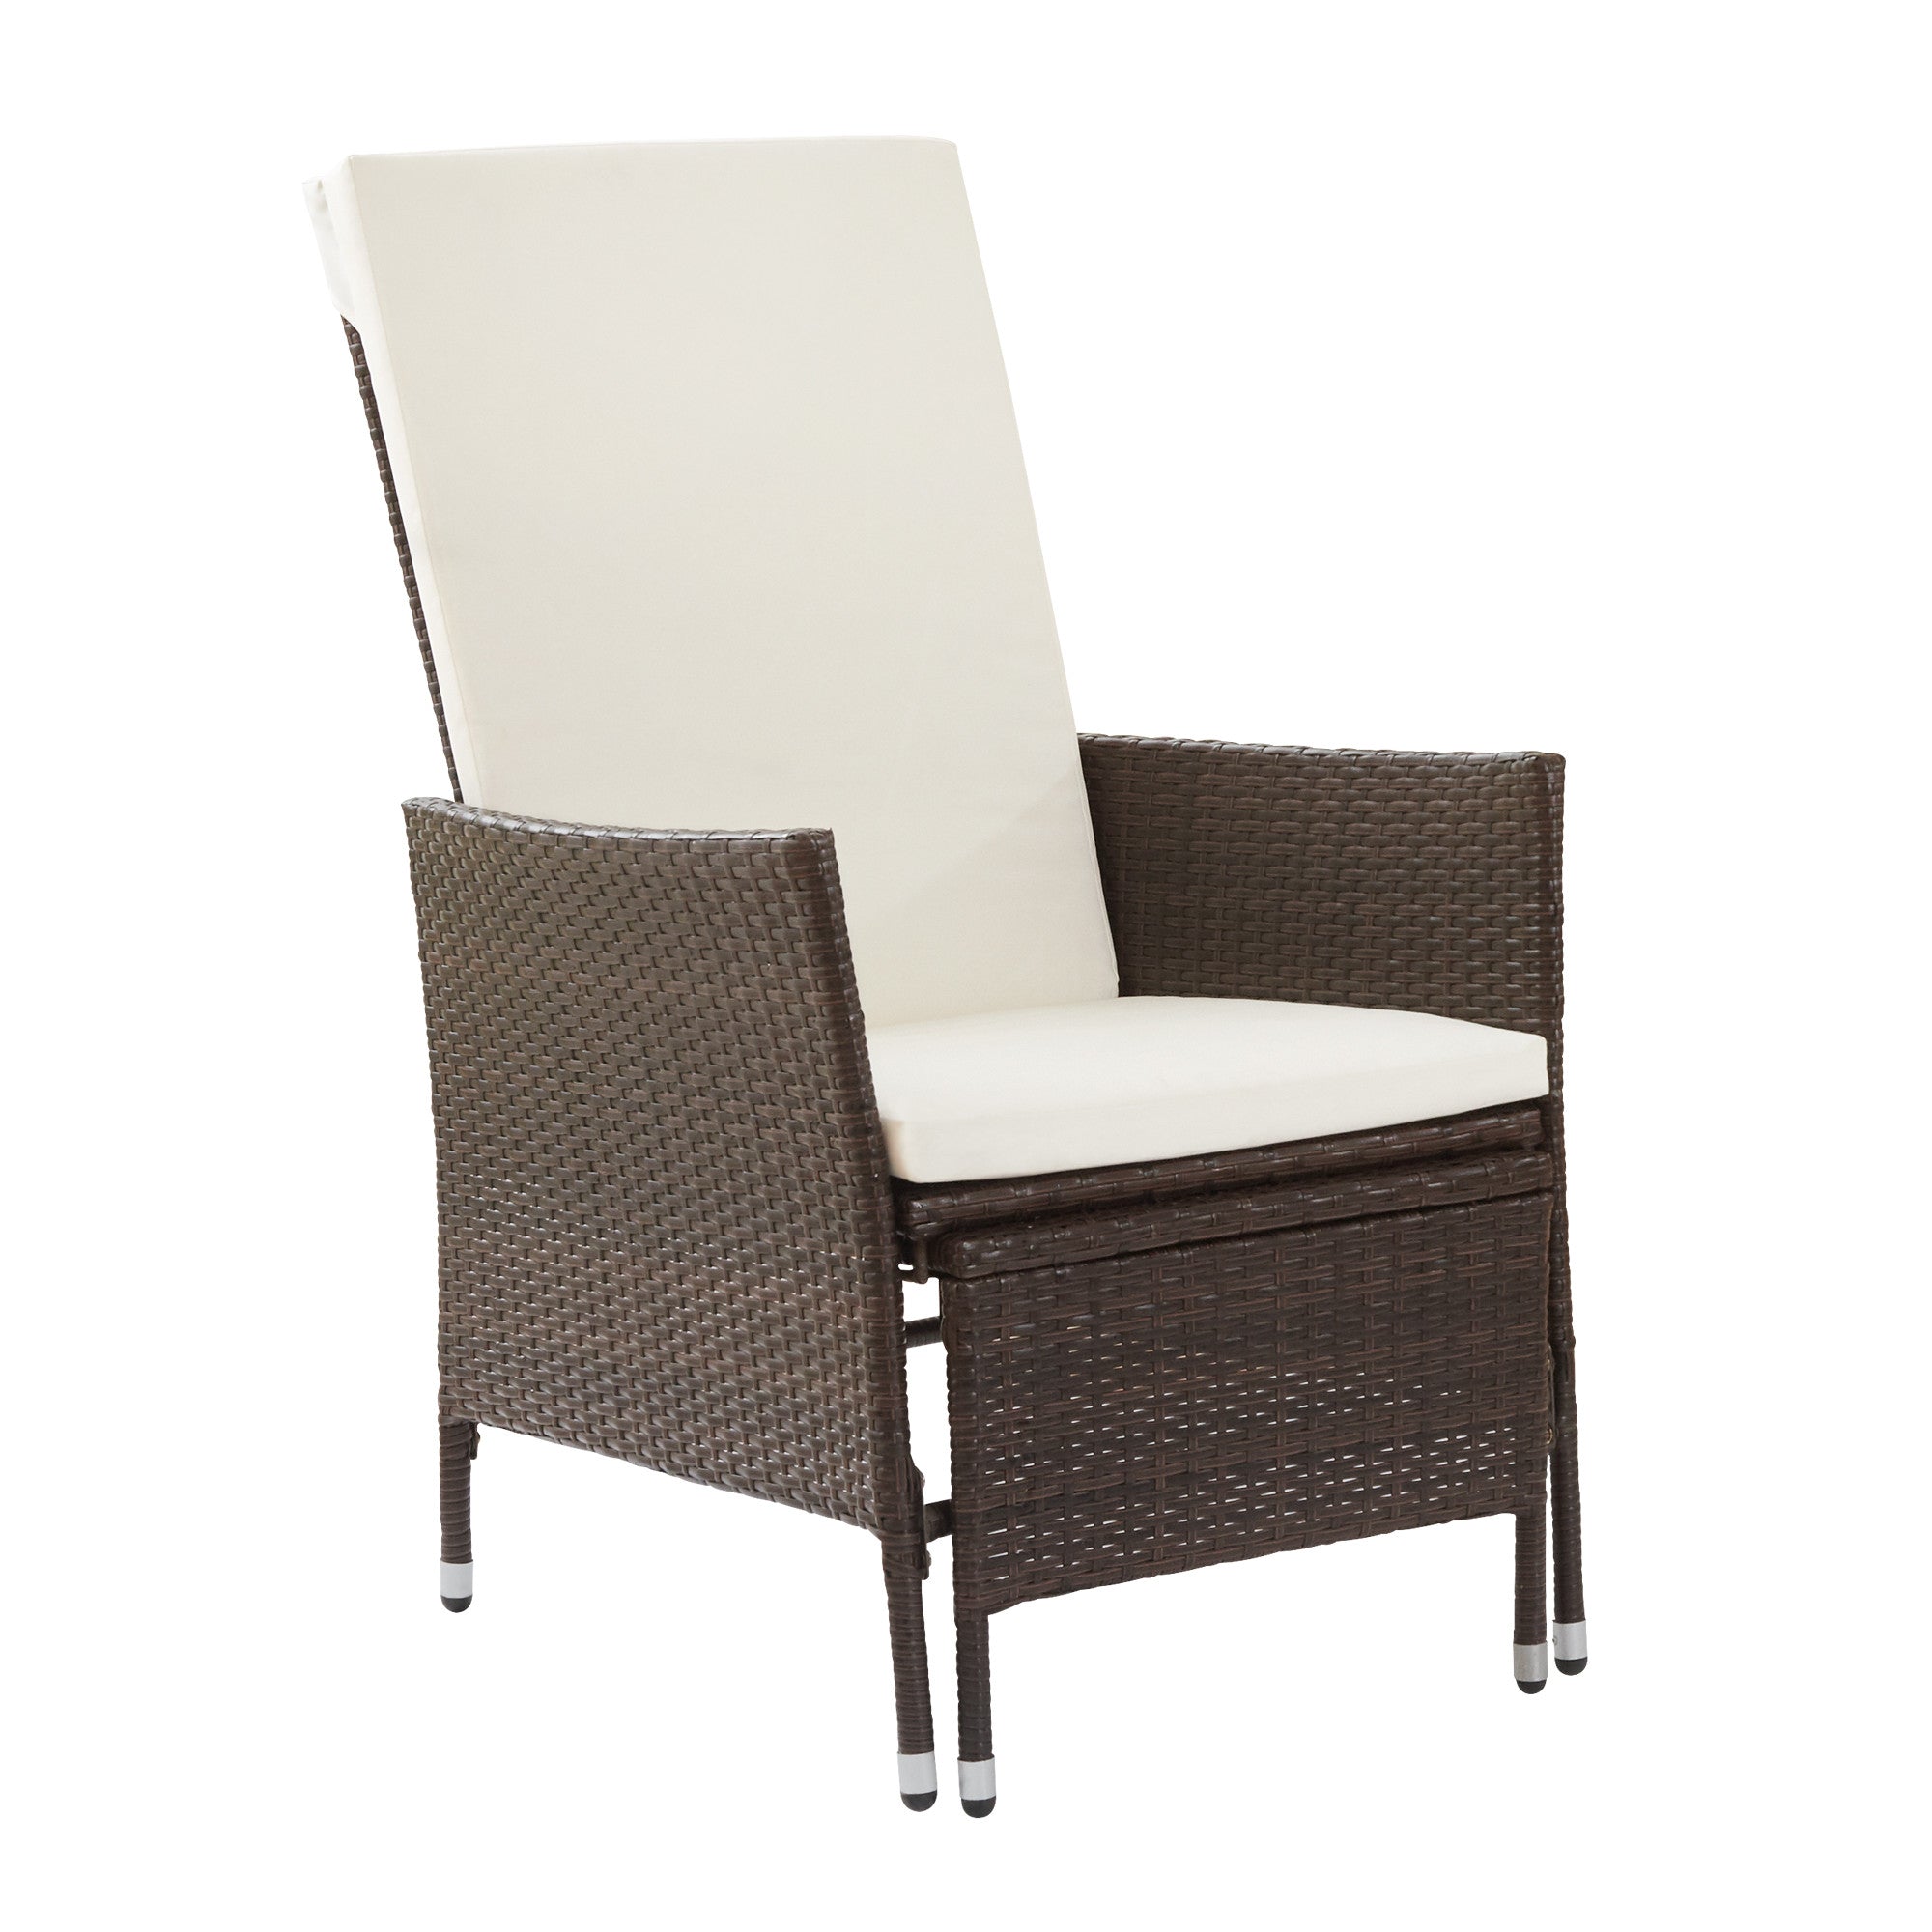 Teamson Home Outdoor Rattan Patio Chair with Ottoman and Cushions, Brown/White